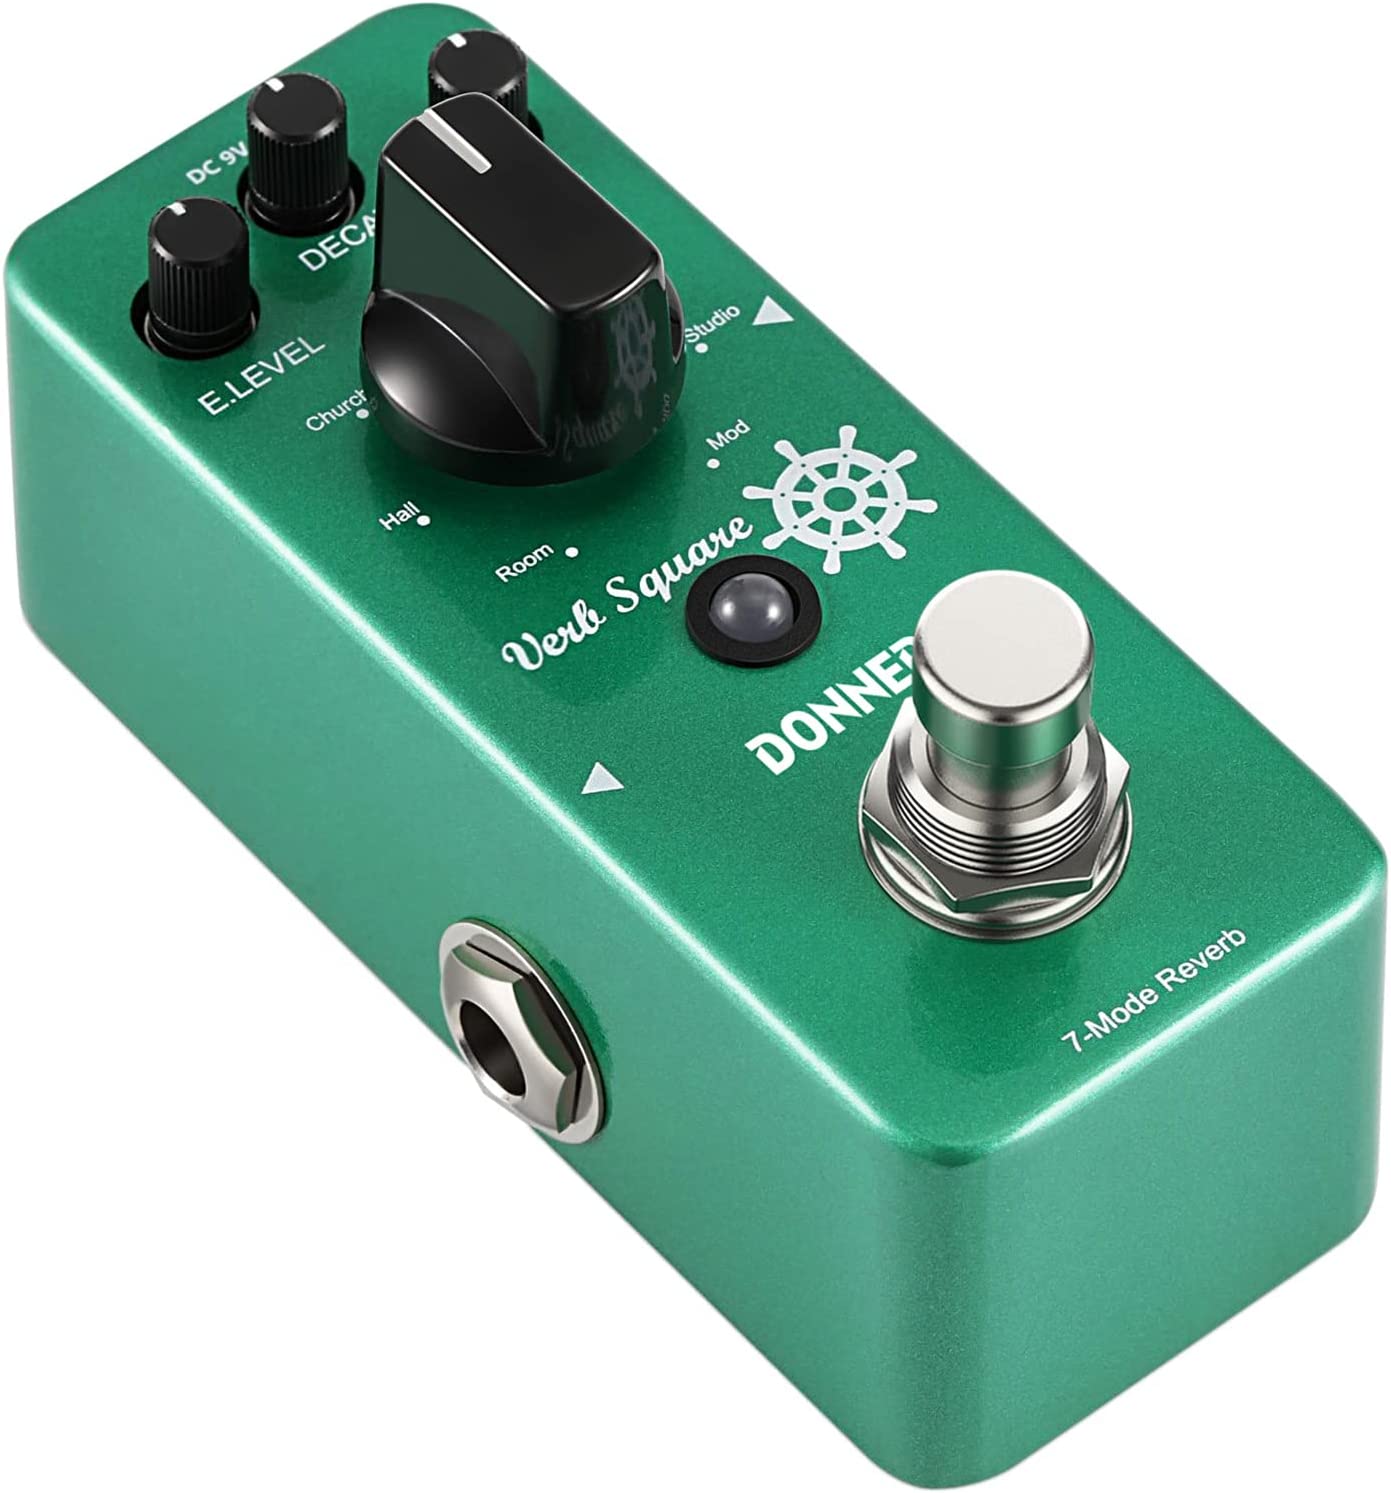 Donner Reverb Guitar Pedal on a white background